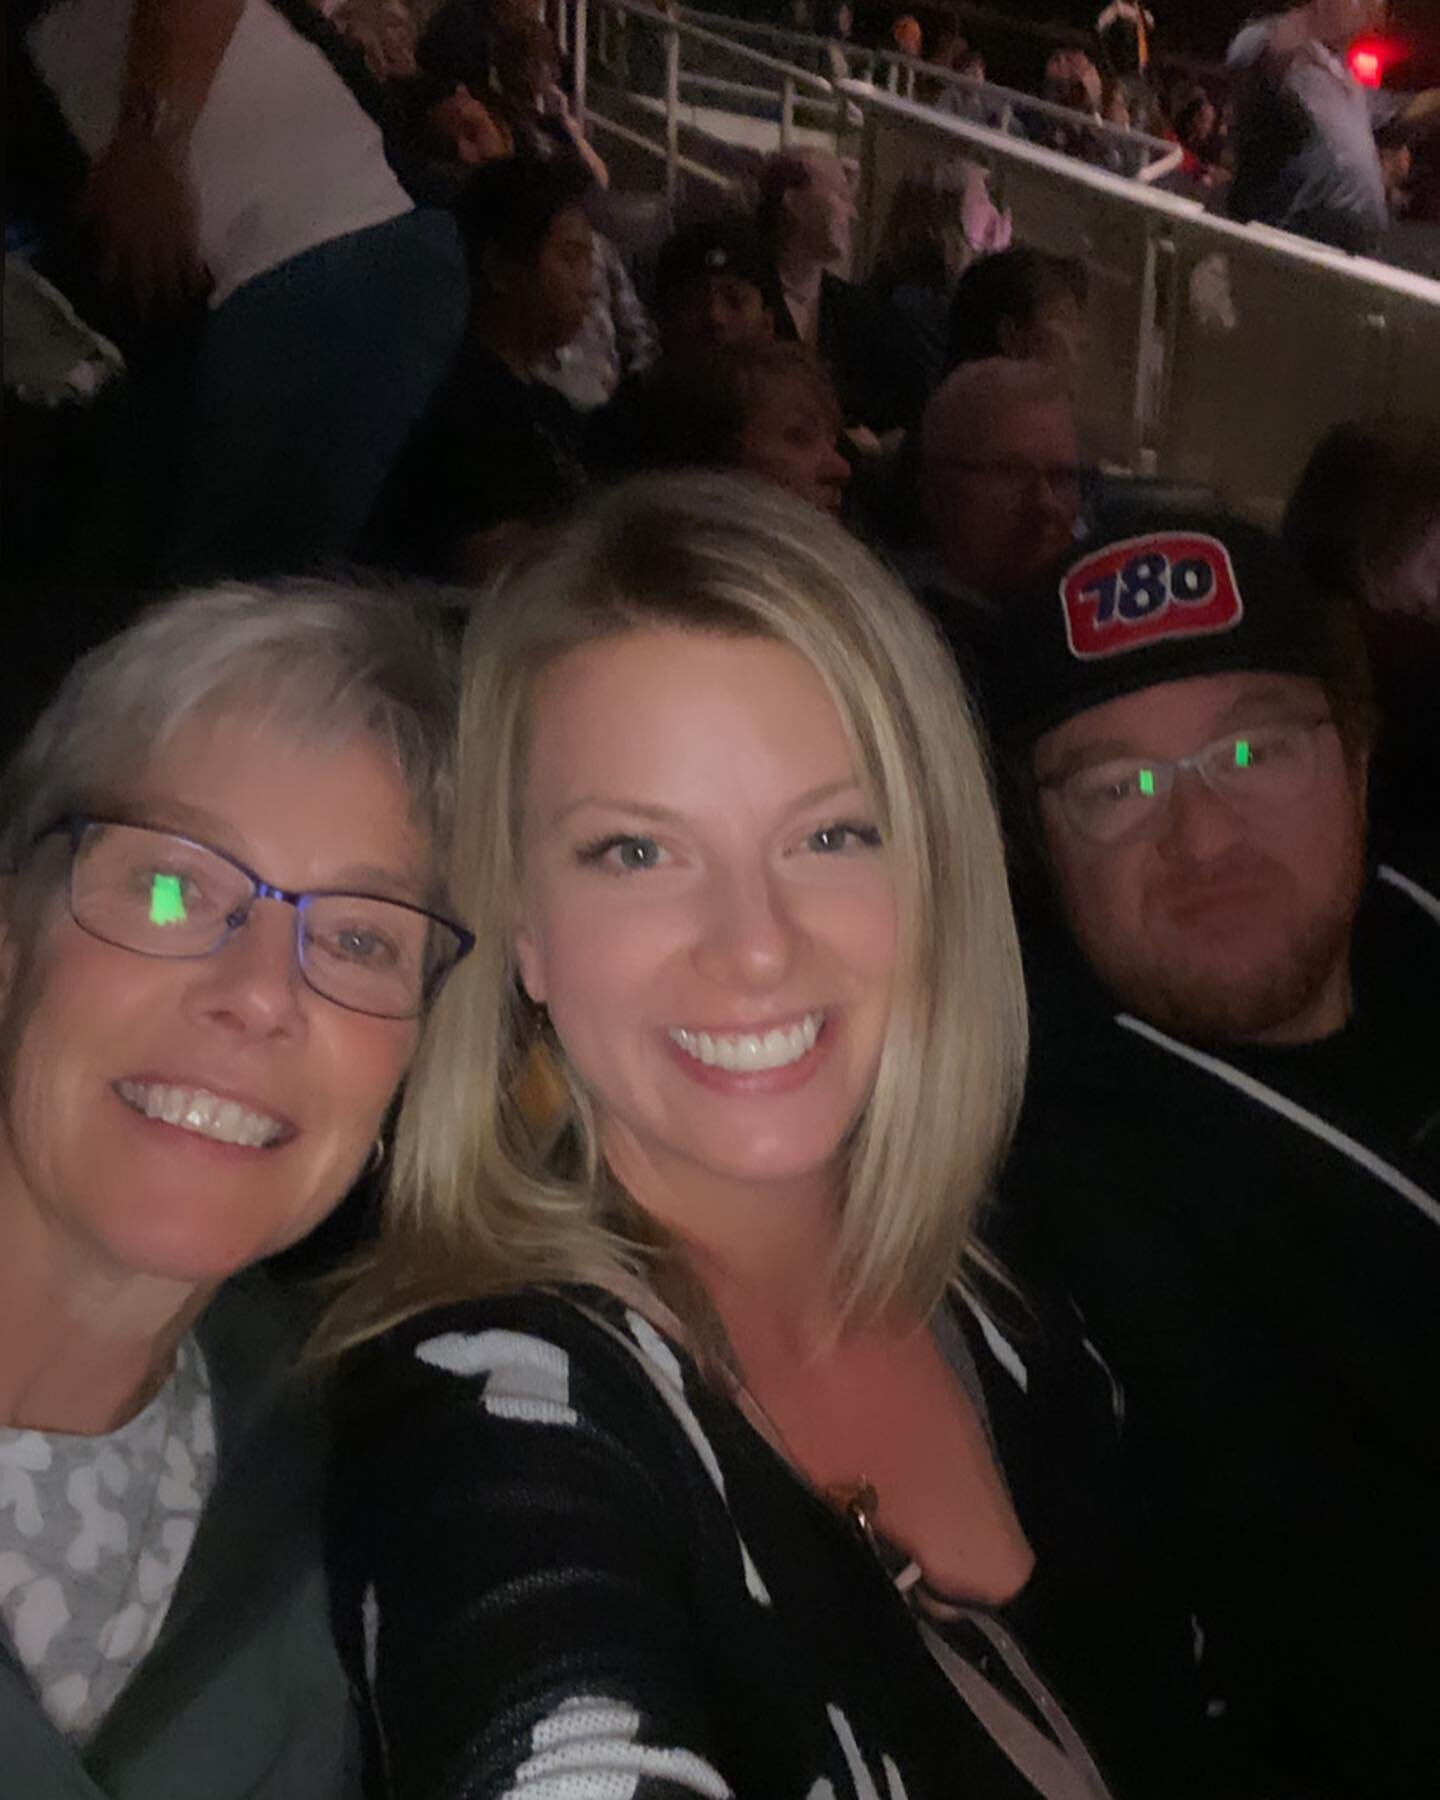 When I was 10 years old I remember my mom being so excited to go see The @eagles when they came to the coliseum. Now ; 28 years later I had the opportunity to take her to see them again( along with Matt 😂) . If country music has taught me anything l